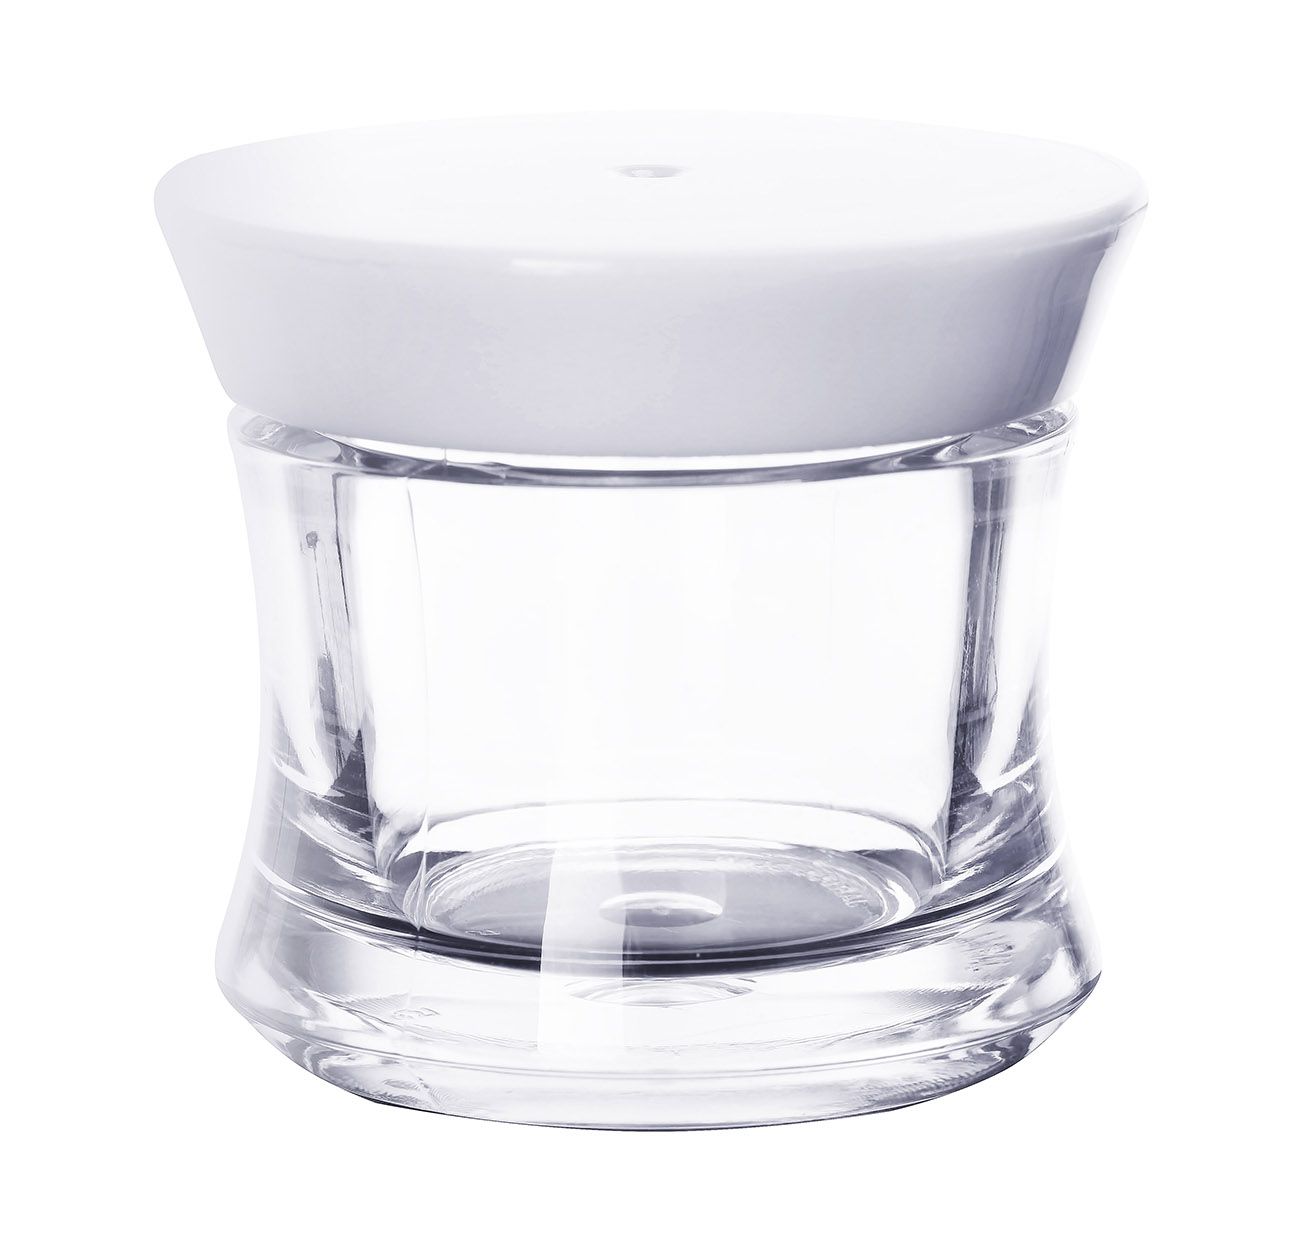 <p class="p1">The cosmetic jar with a capacity of 6 ml is made of acrylic and is presented in two colors: transparent and white. Designed for storage of lip balms, creams, gels, masks, samples of cosmetic products.</p>